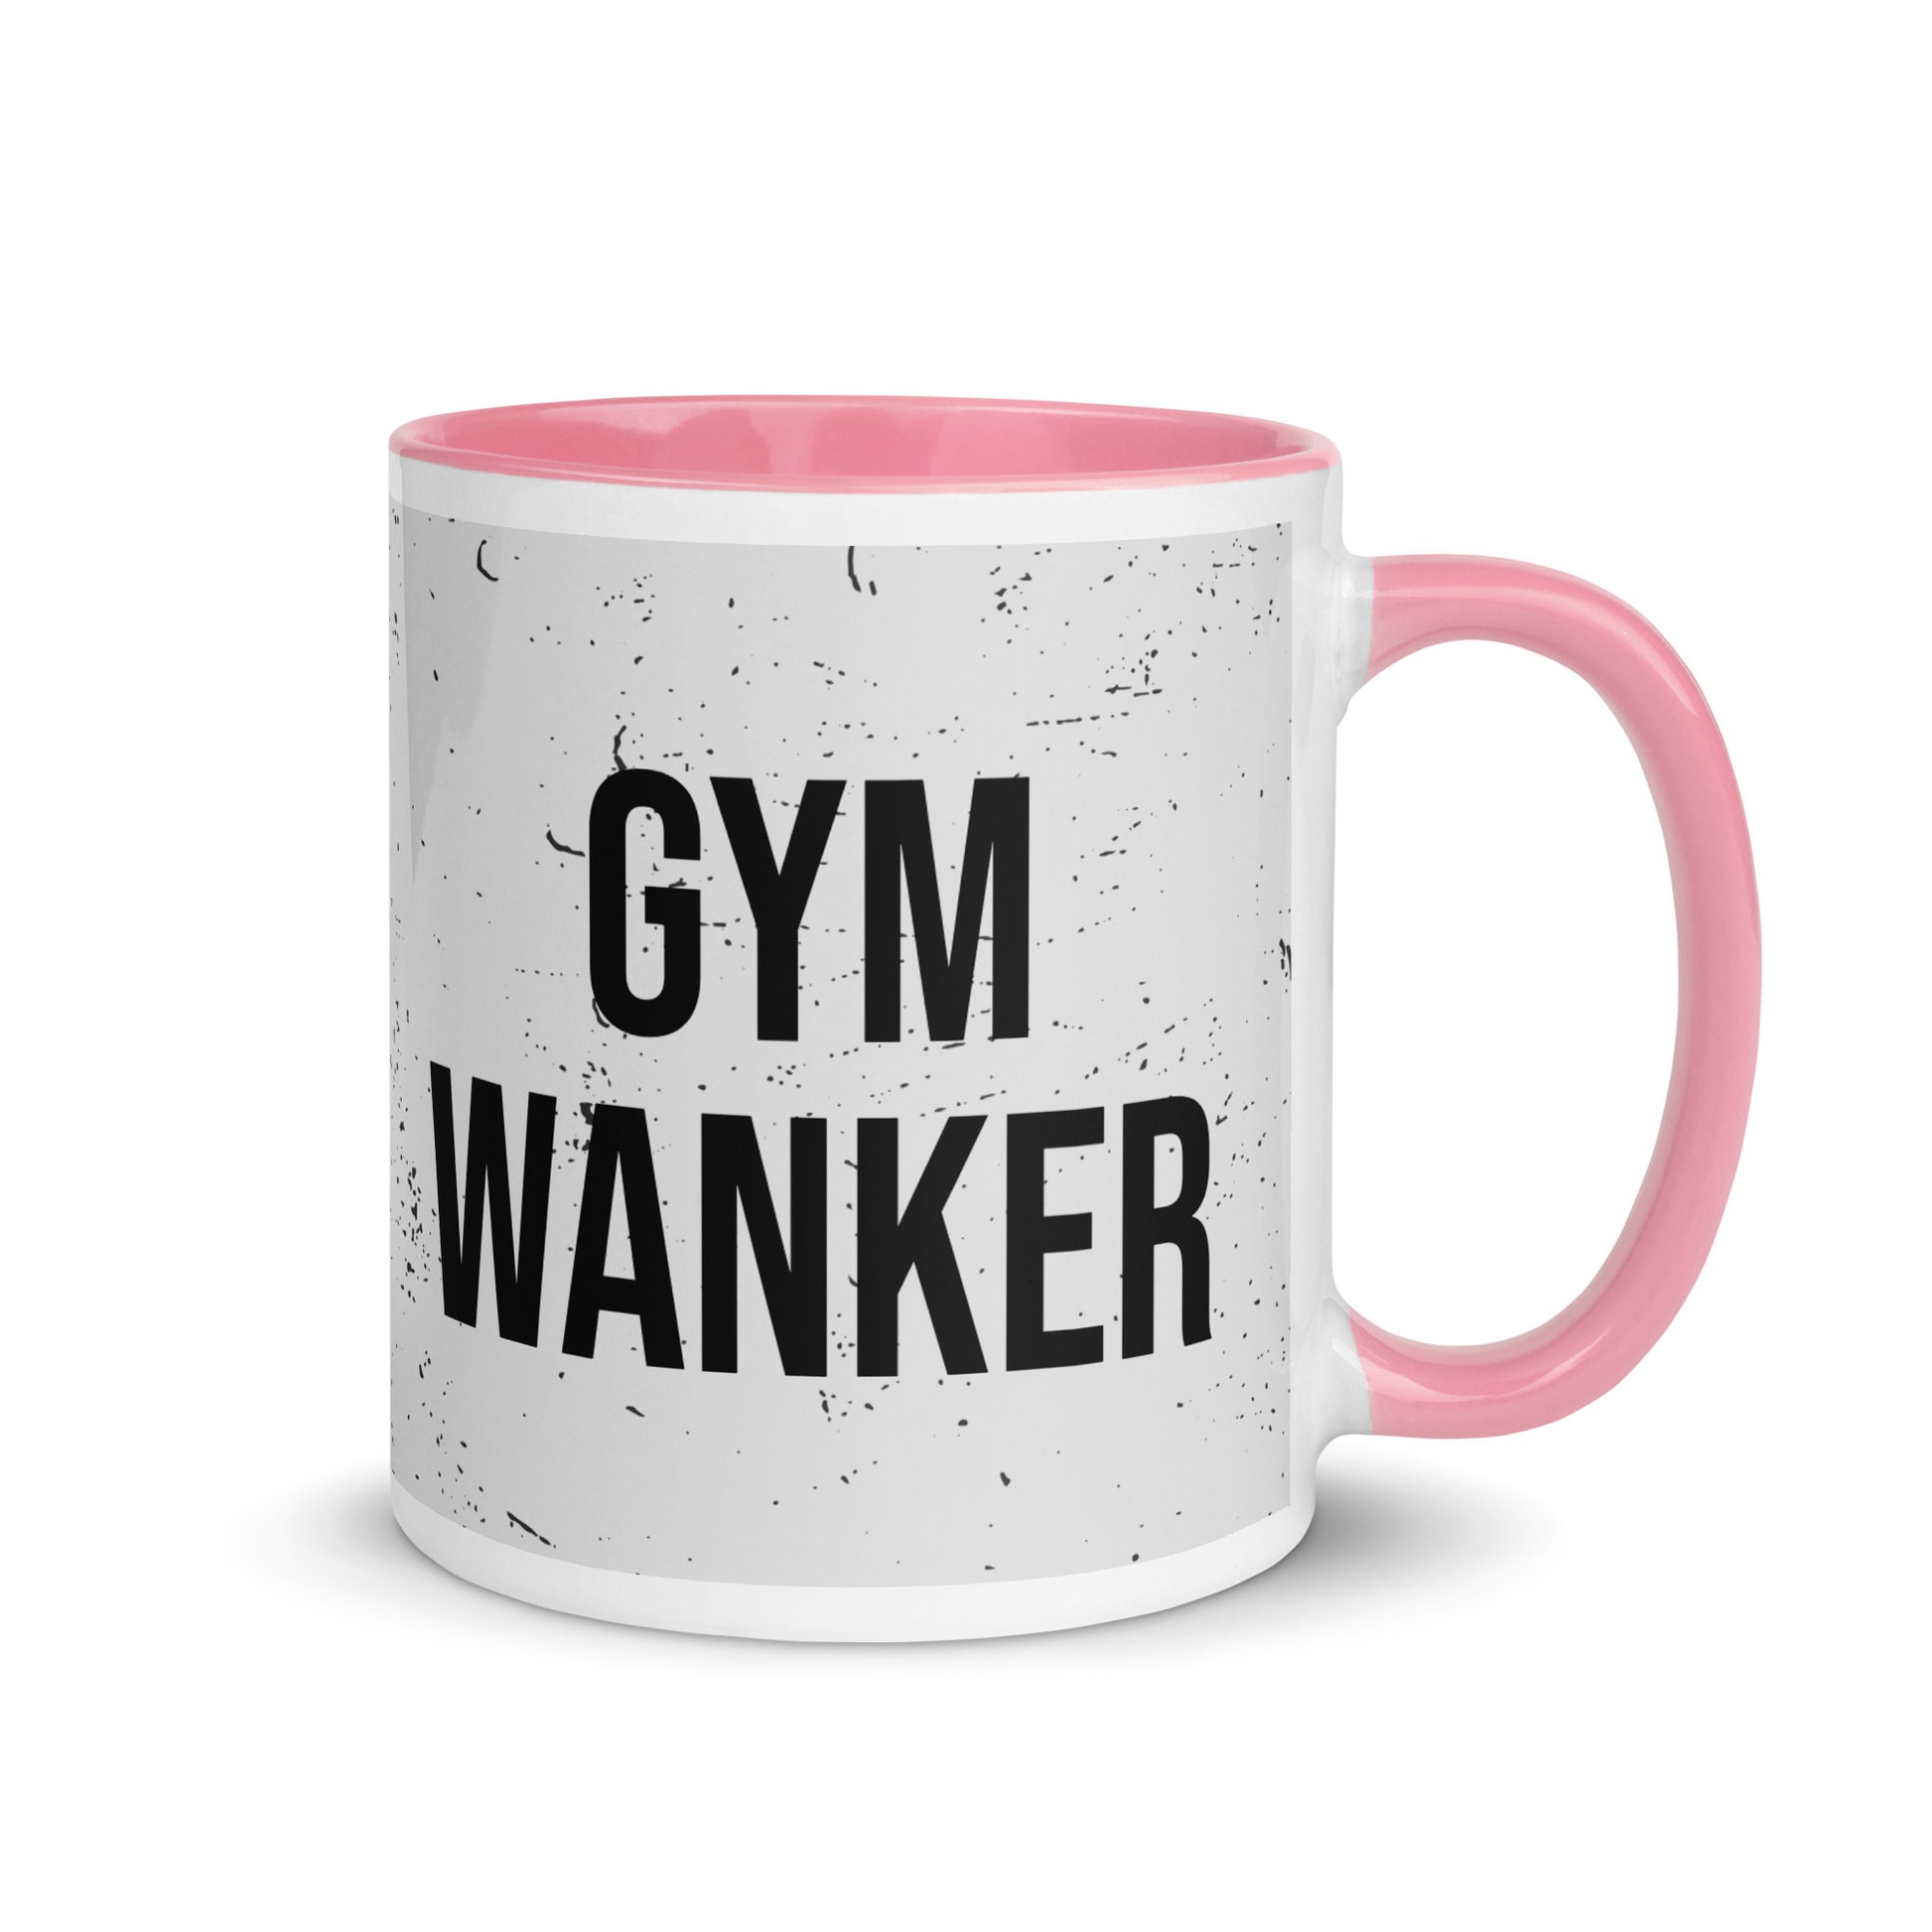 Pink handled mug with gym wanker written on it, across a grey splatter background. A gift for someone who loves the gym.